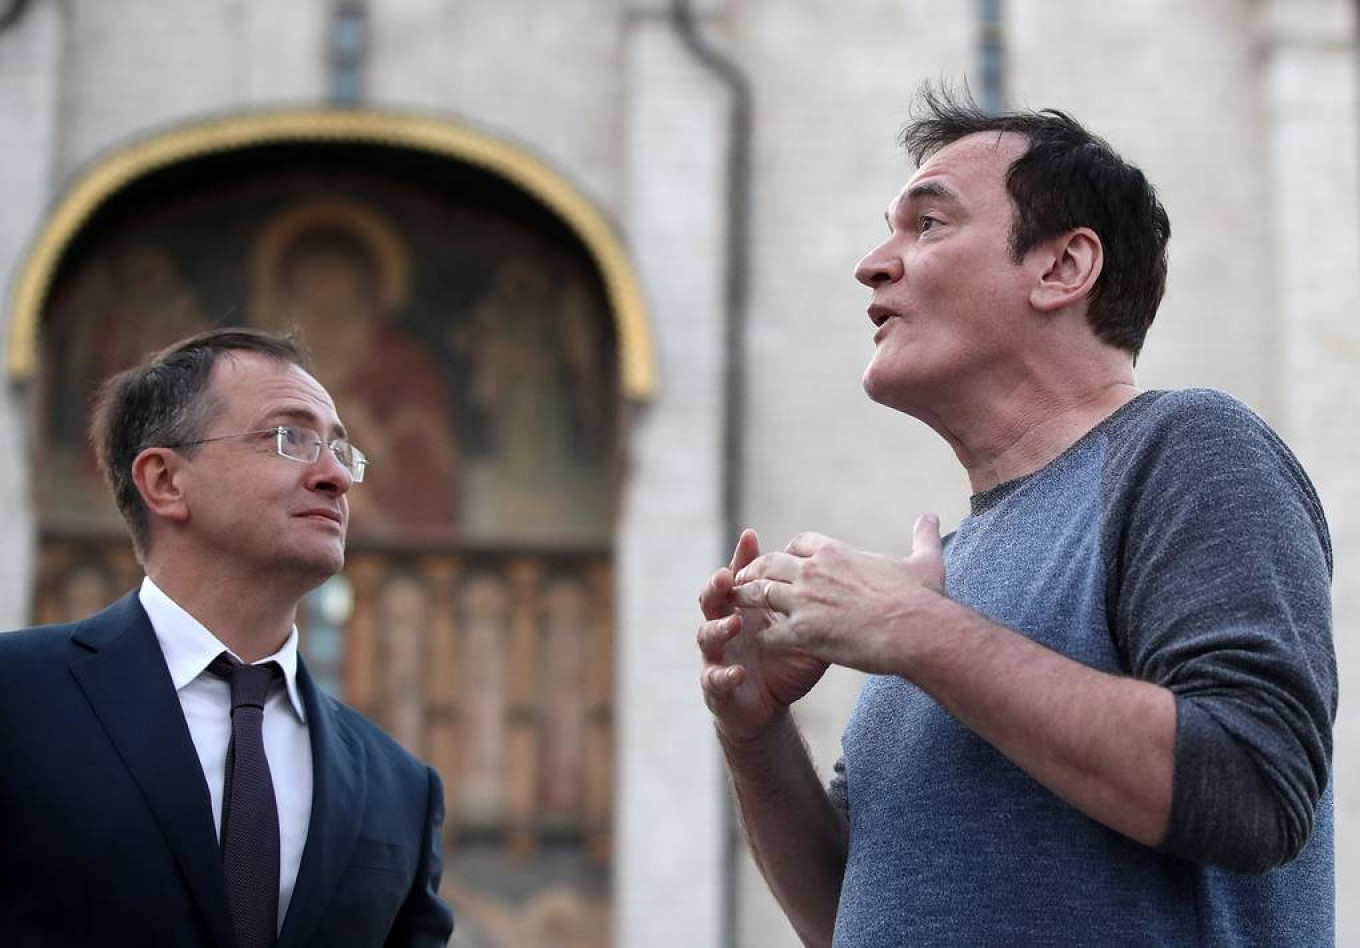 Tarantino ‘Shocked By Moscow’ in First Visit to Russia Since 2004